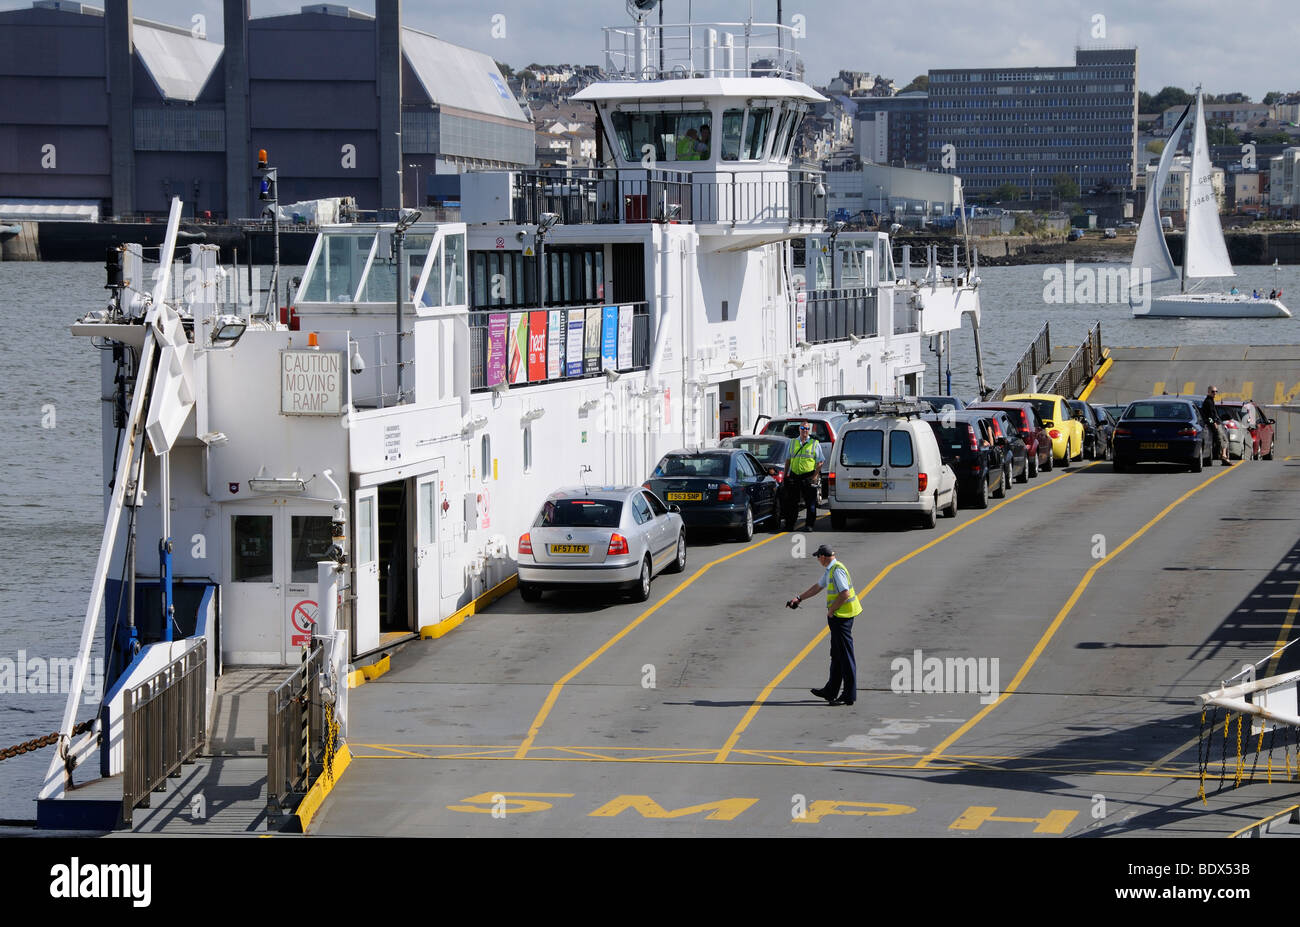 Loading the roro Torpoint ferry which crosses the Tamar River between Torpoint in Cornwall and Devonport Plymouth in Devon UK Stock Photo